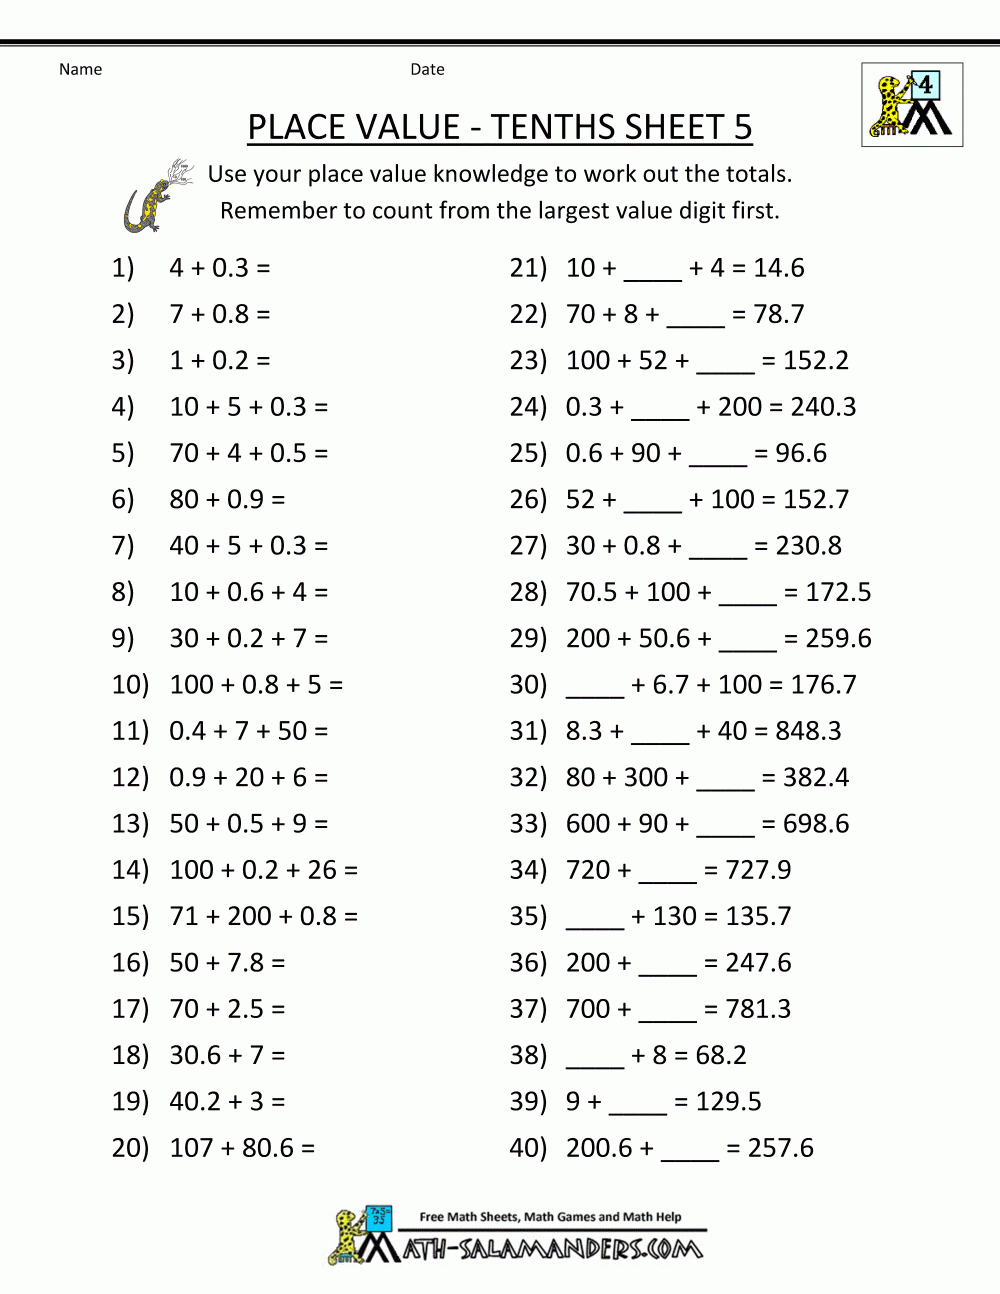 Free Online Math Worksheets Place Value Tenths 5 with Multiplication Worksheets Online